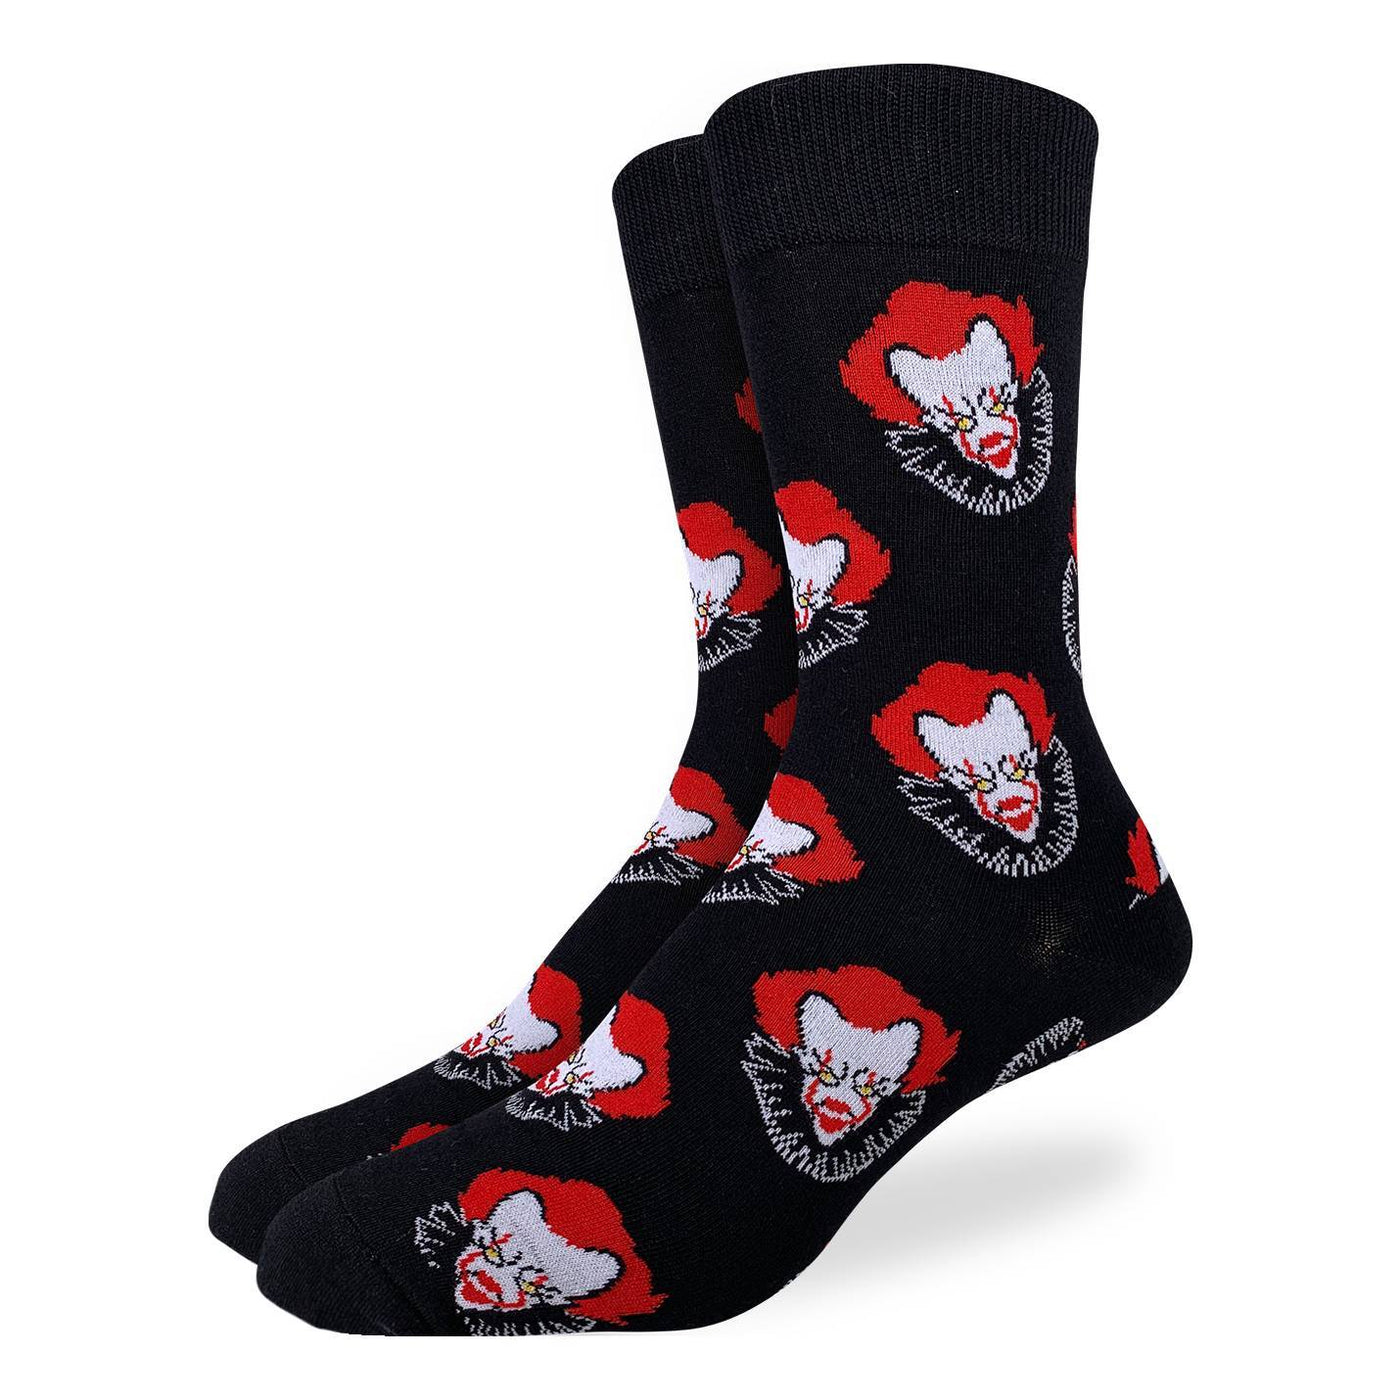 "Scary Clown" Crew Socks by Good Luck Sock - Large